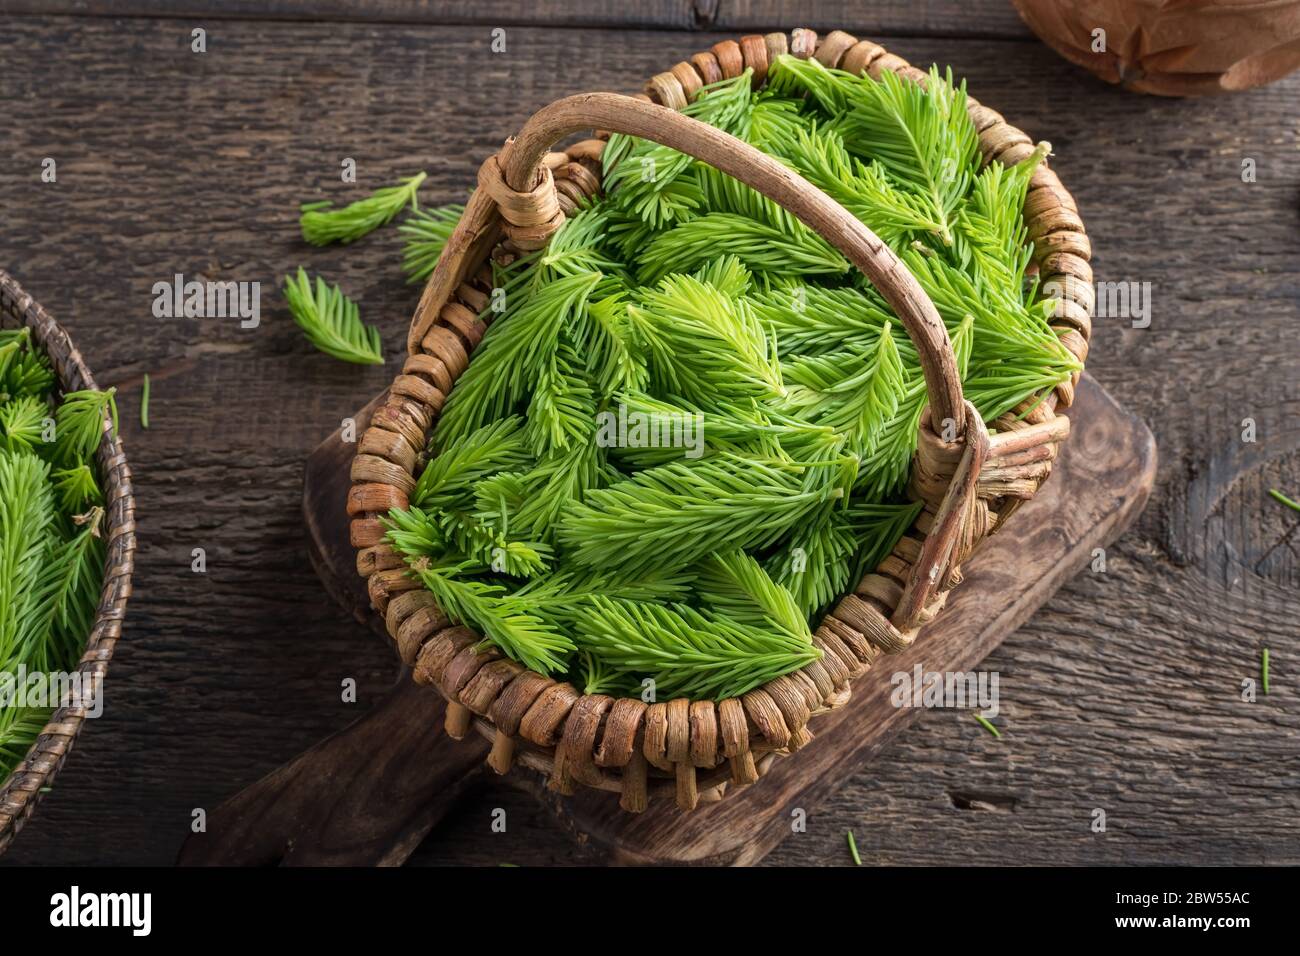 Young spruce tips in a basket, collected to prepare homemade herbal syrup Stock Photo